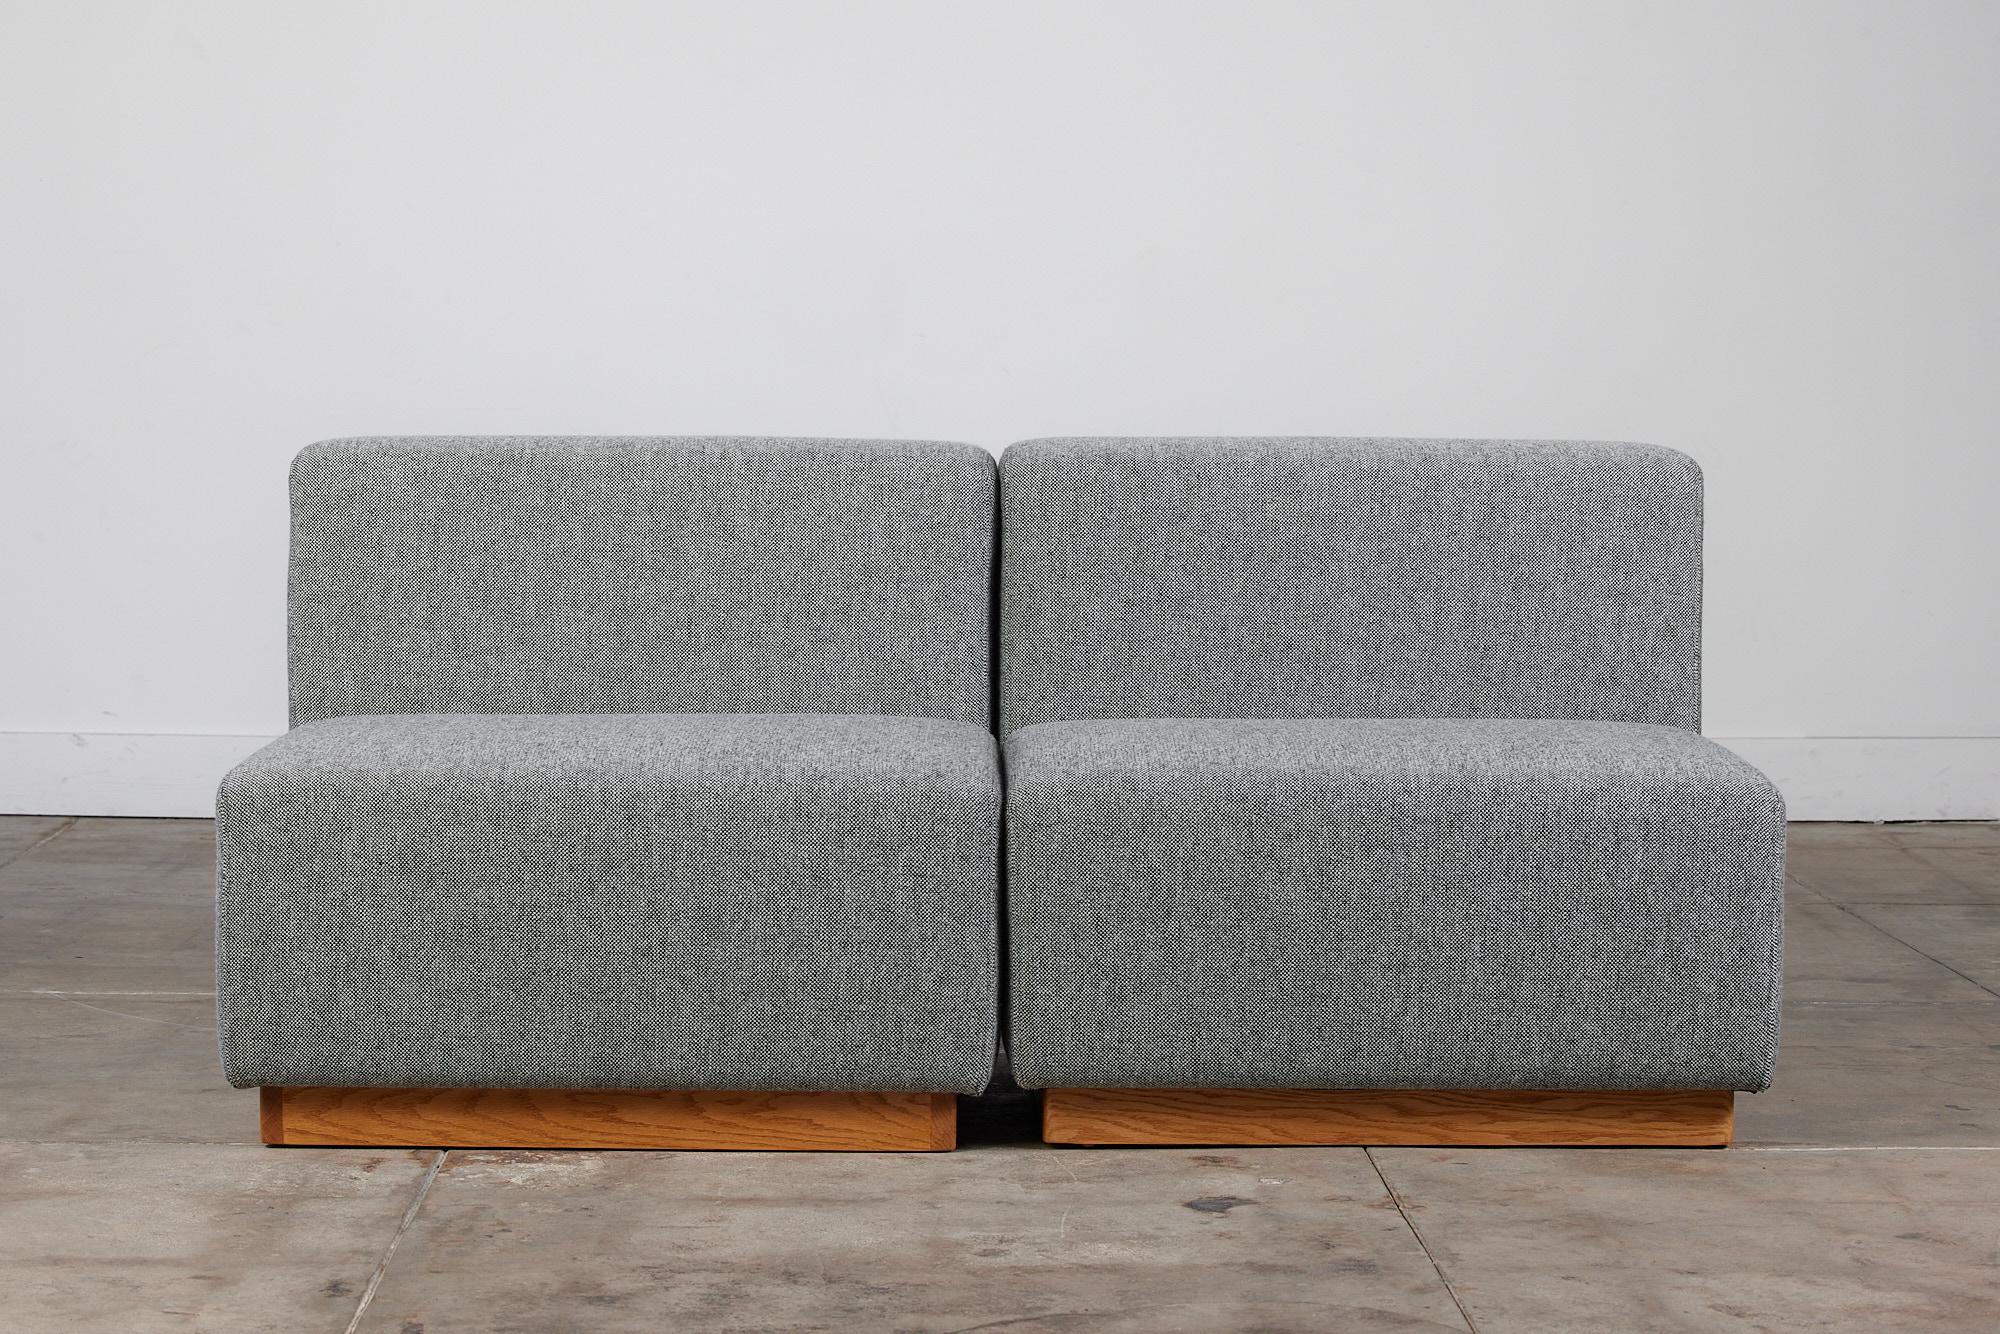 Pair of Giancarlo Piretti Style Modern Cubic Sofa Seats For Sale 4